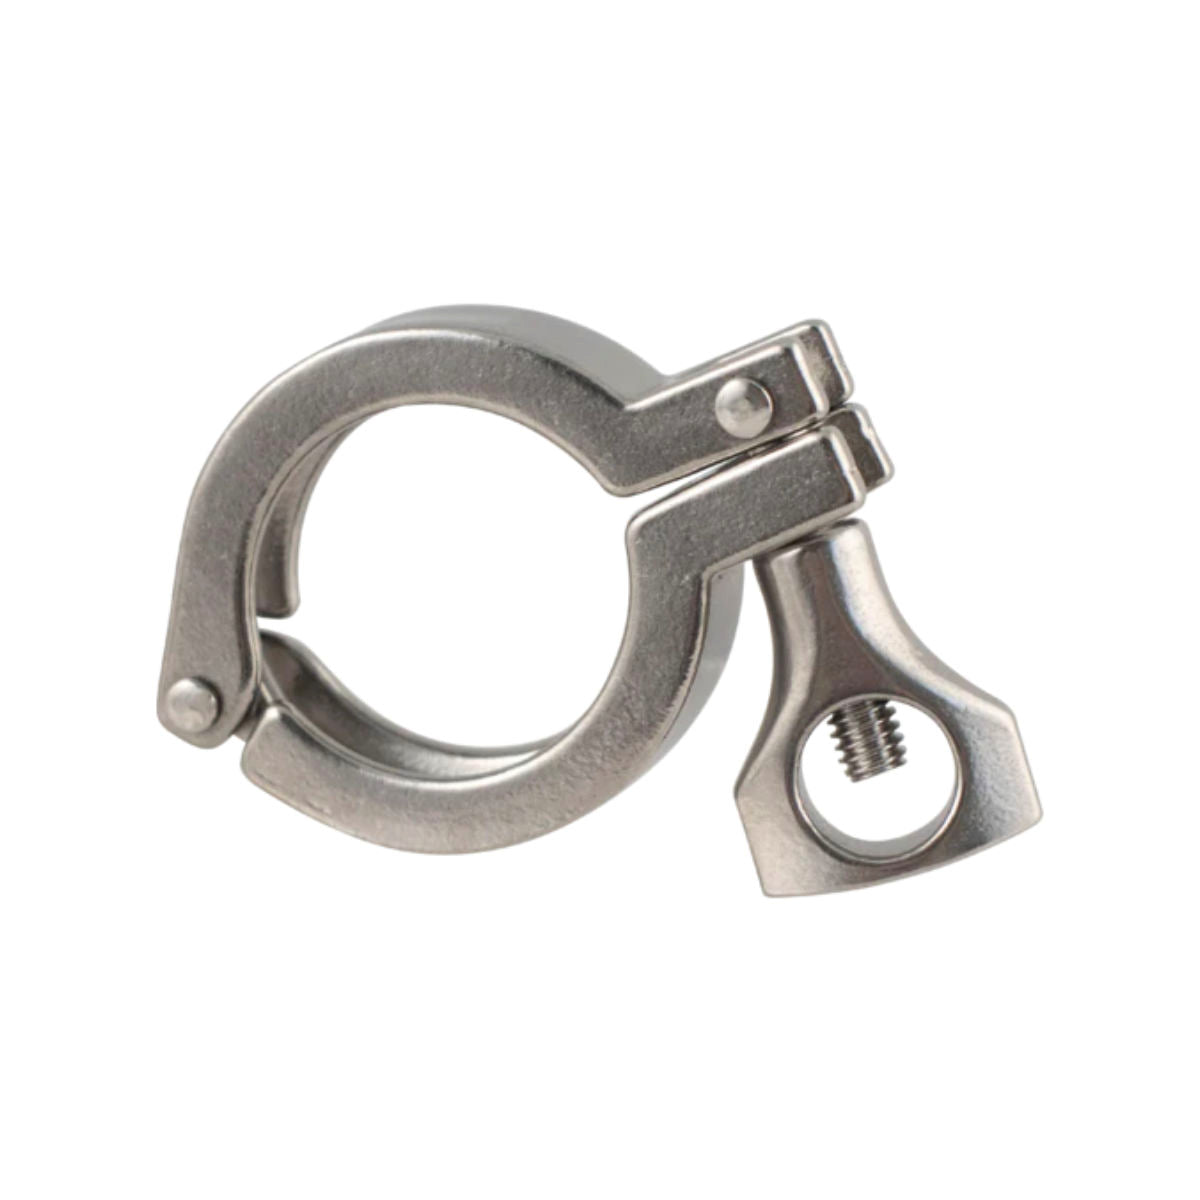 1.5 inch tri clamp stainless steel